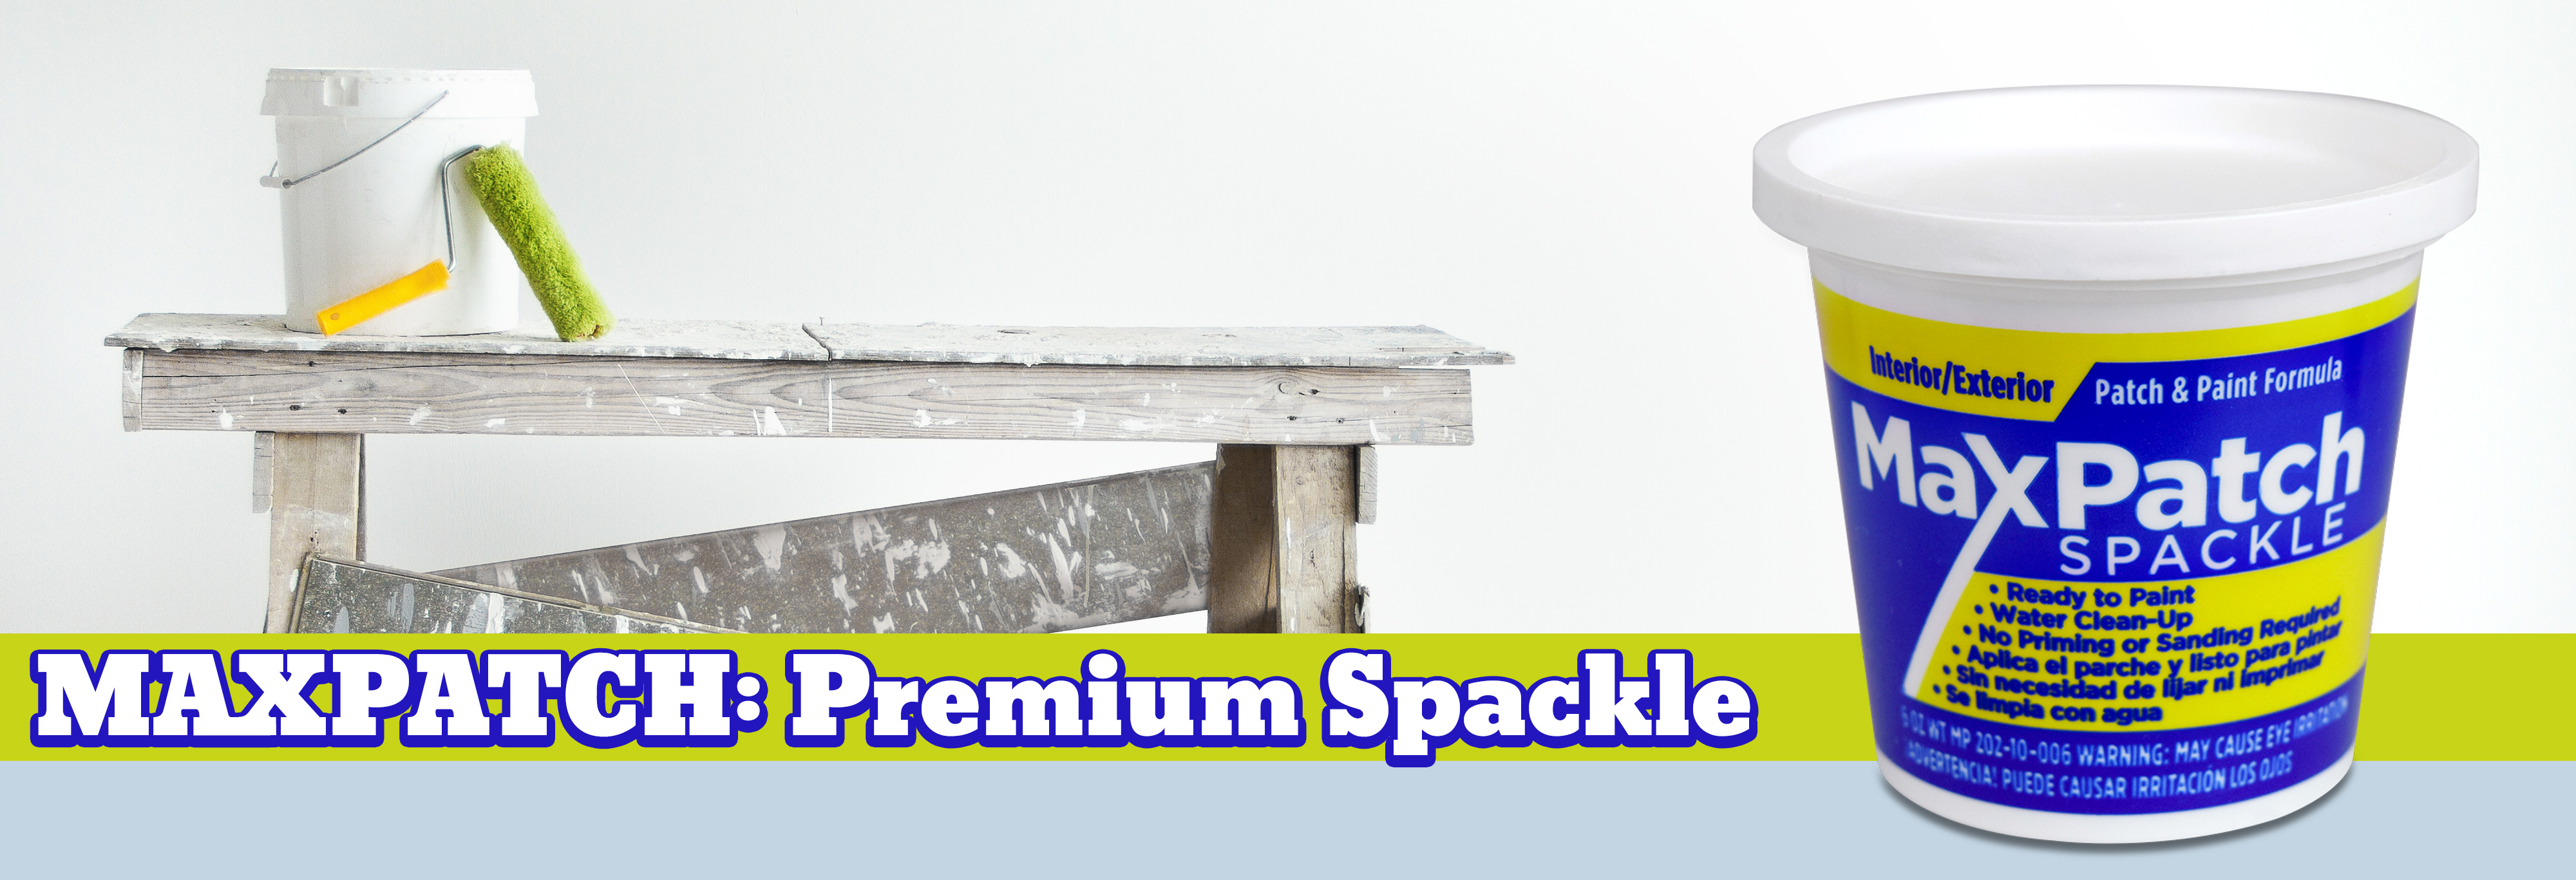 PureSky Products MaxPatch Premium Spackle